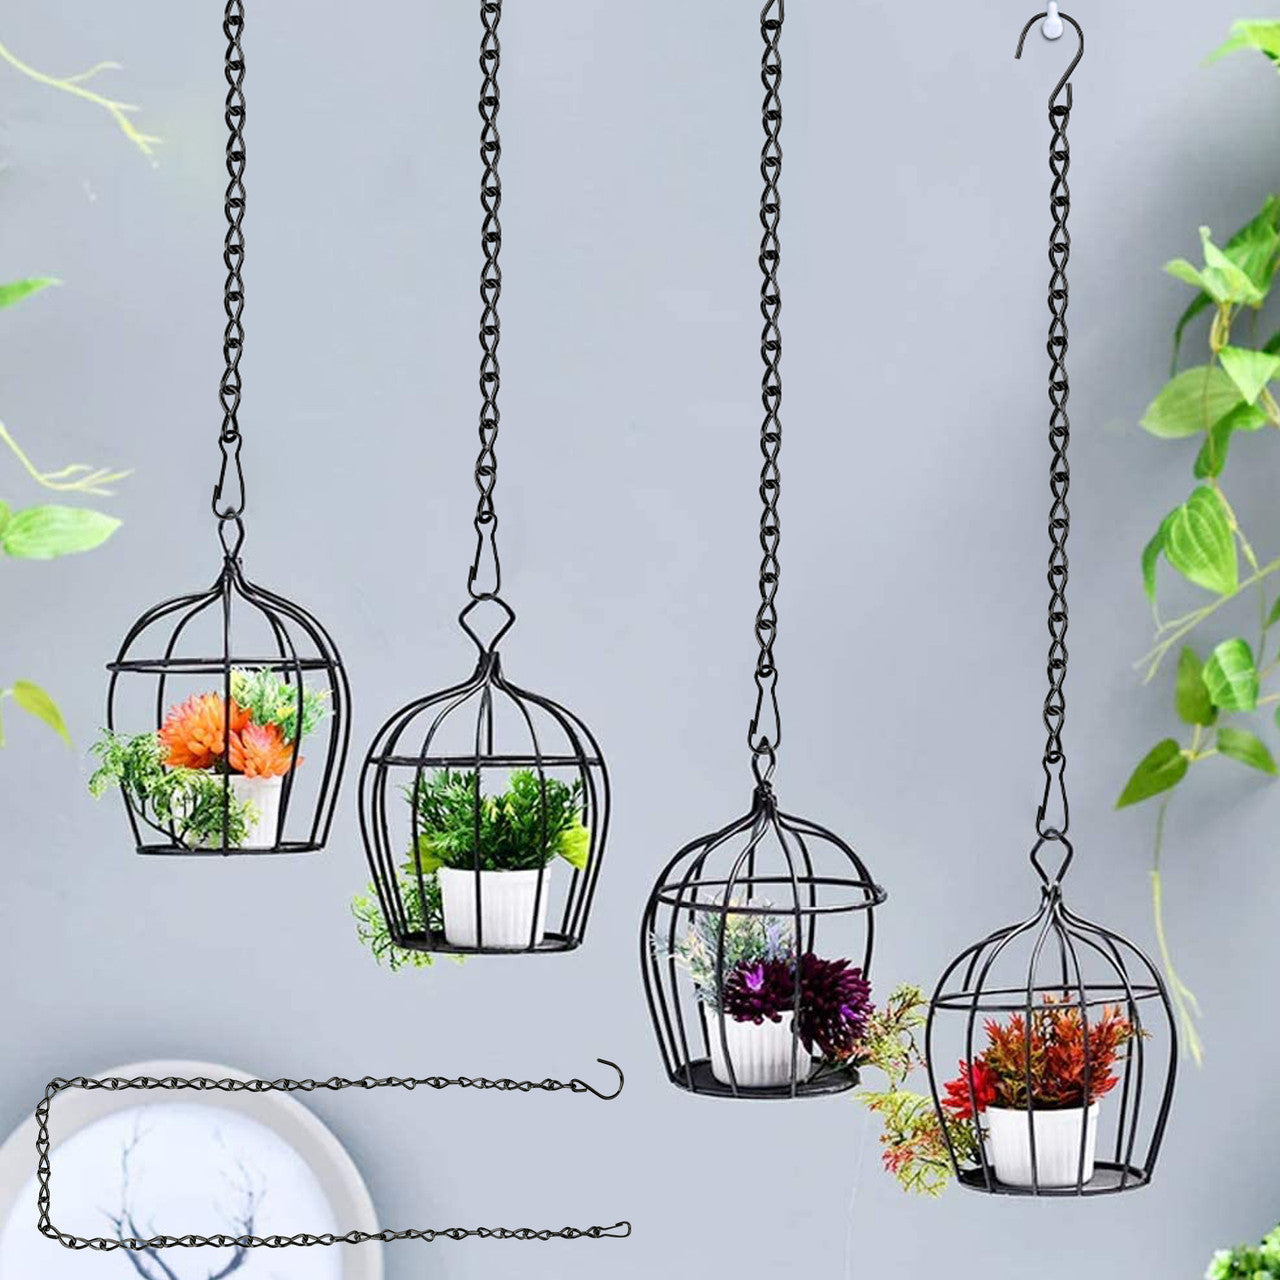 35 Inches Hanging Chain for Decorative Ornaments, Bird Feeders, Planters, (Silver,2pcs)